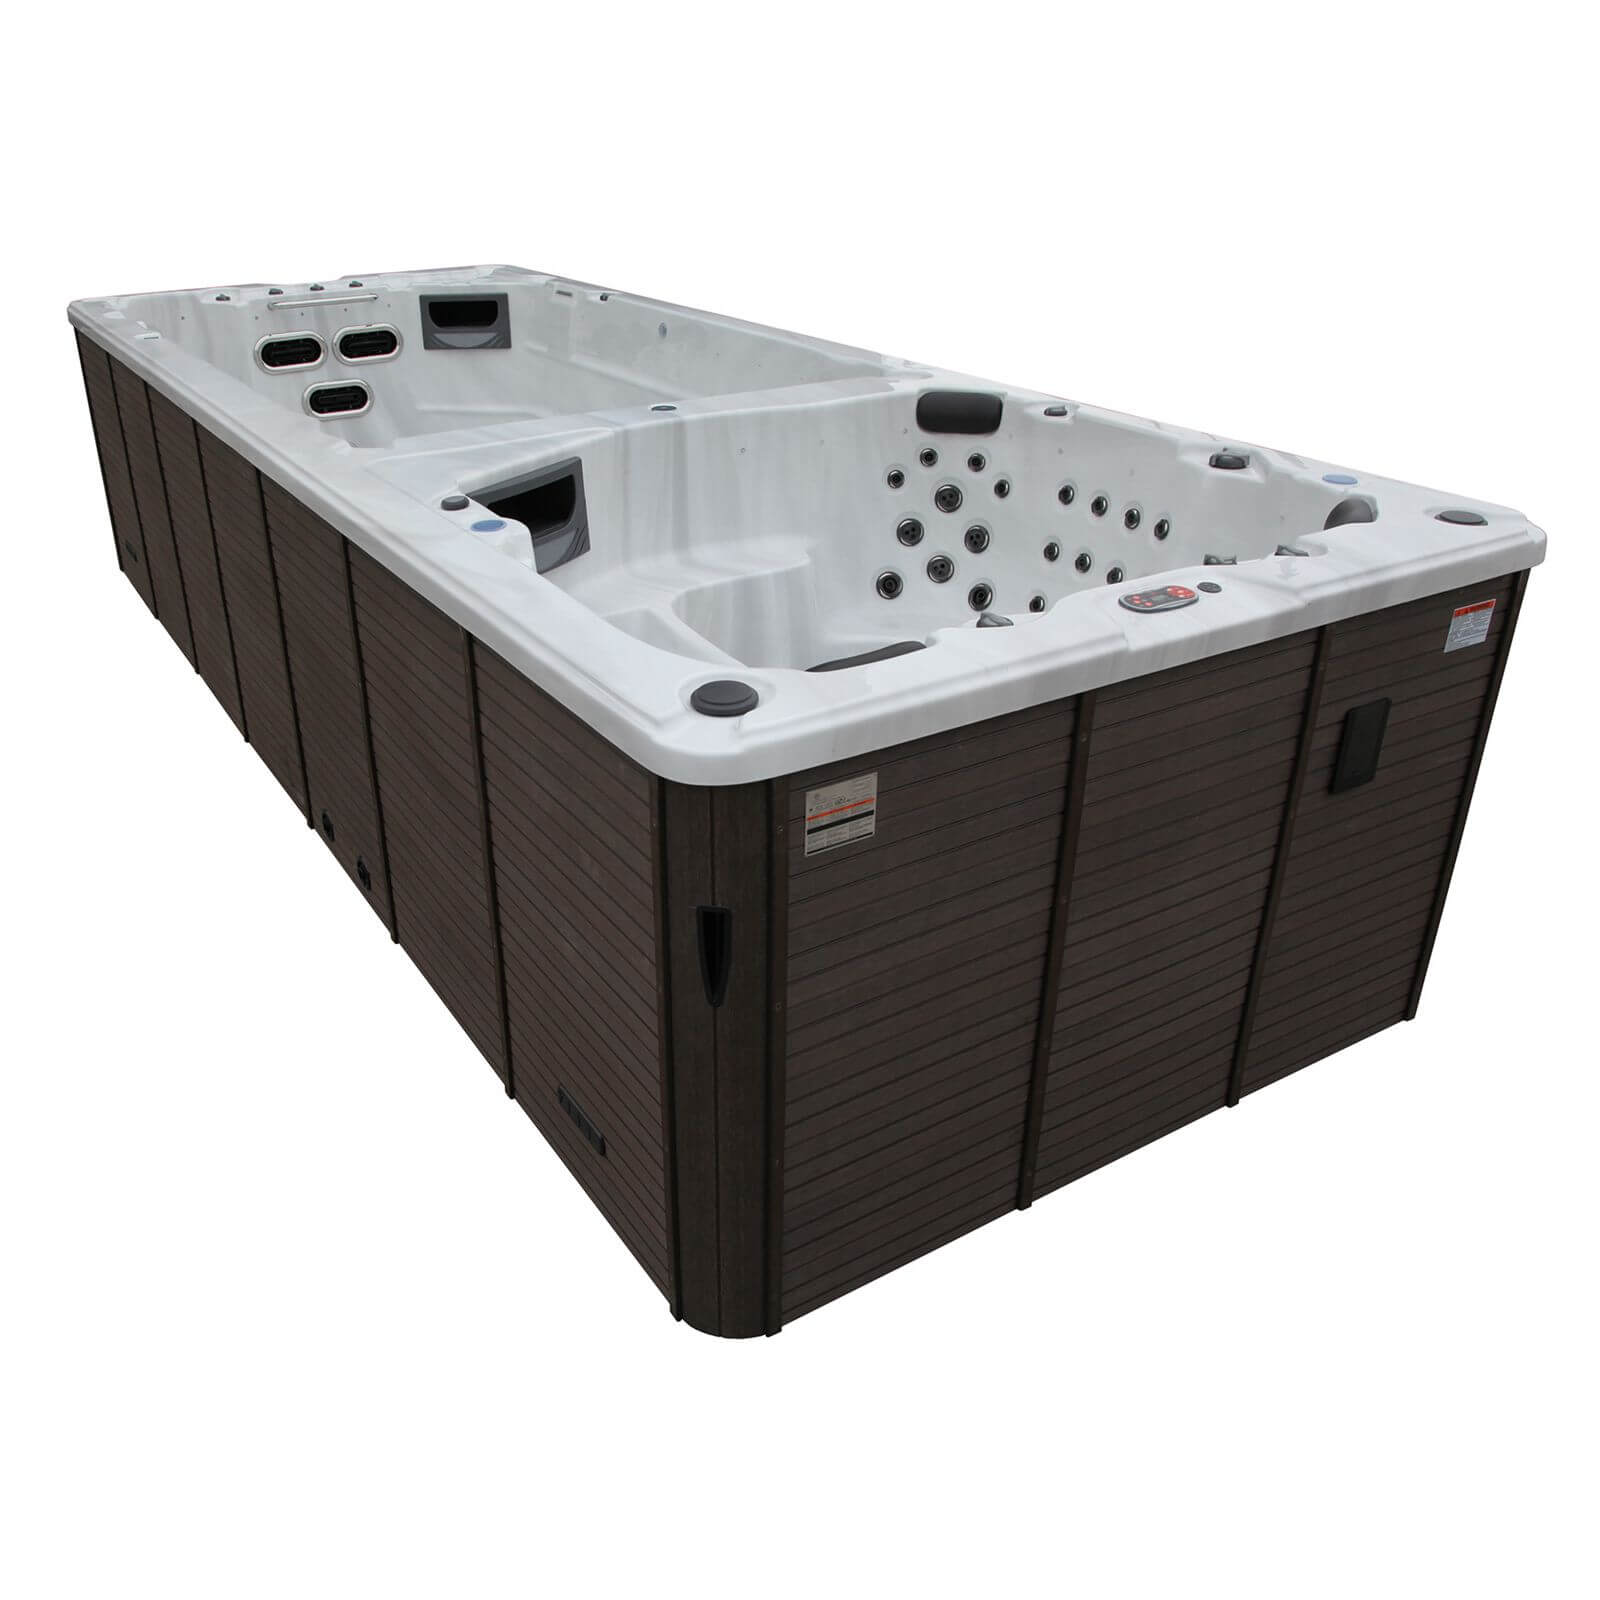 Canadian Spa St. Lawrence 20ft Dual Temperature 7 Person Swim Spa (Includes Free Delivery & Installation)